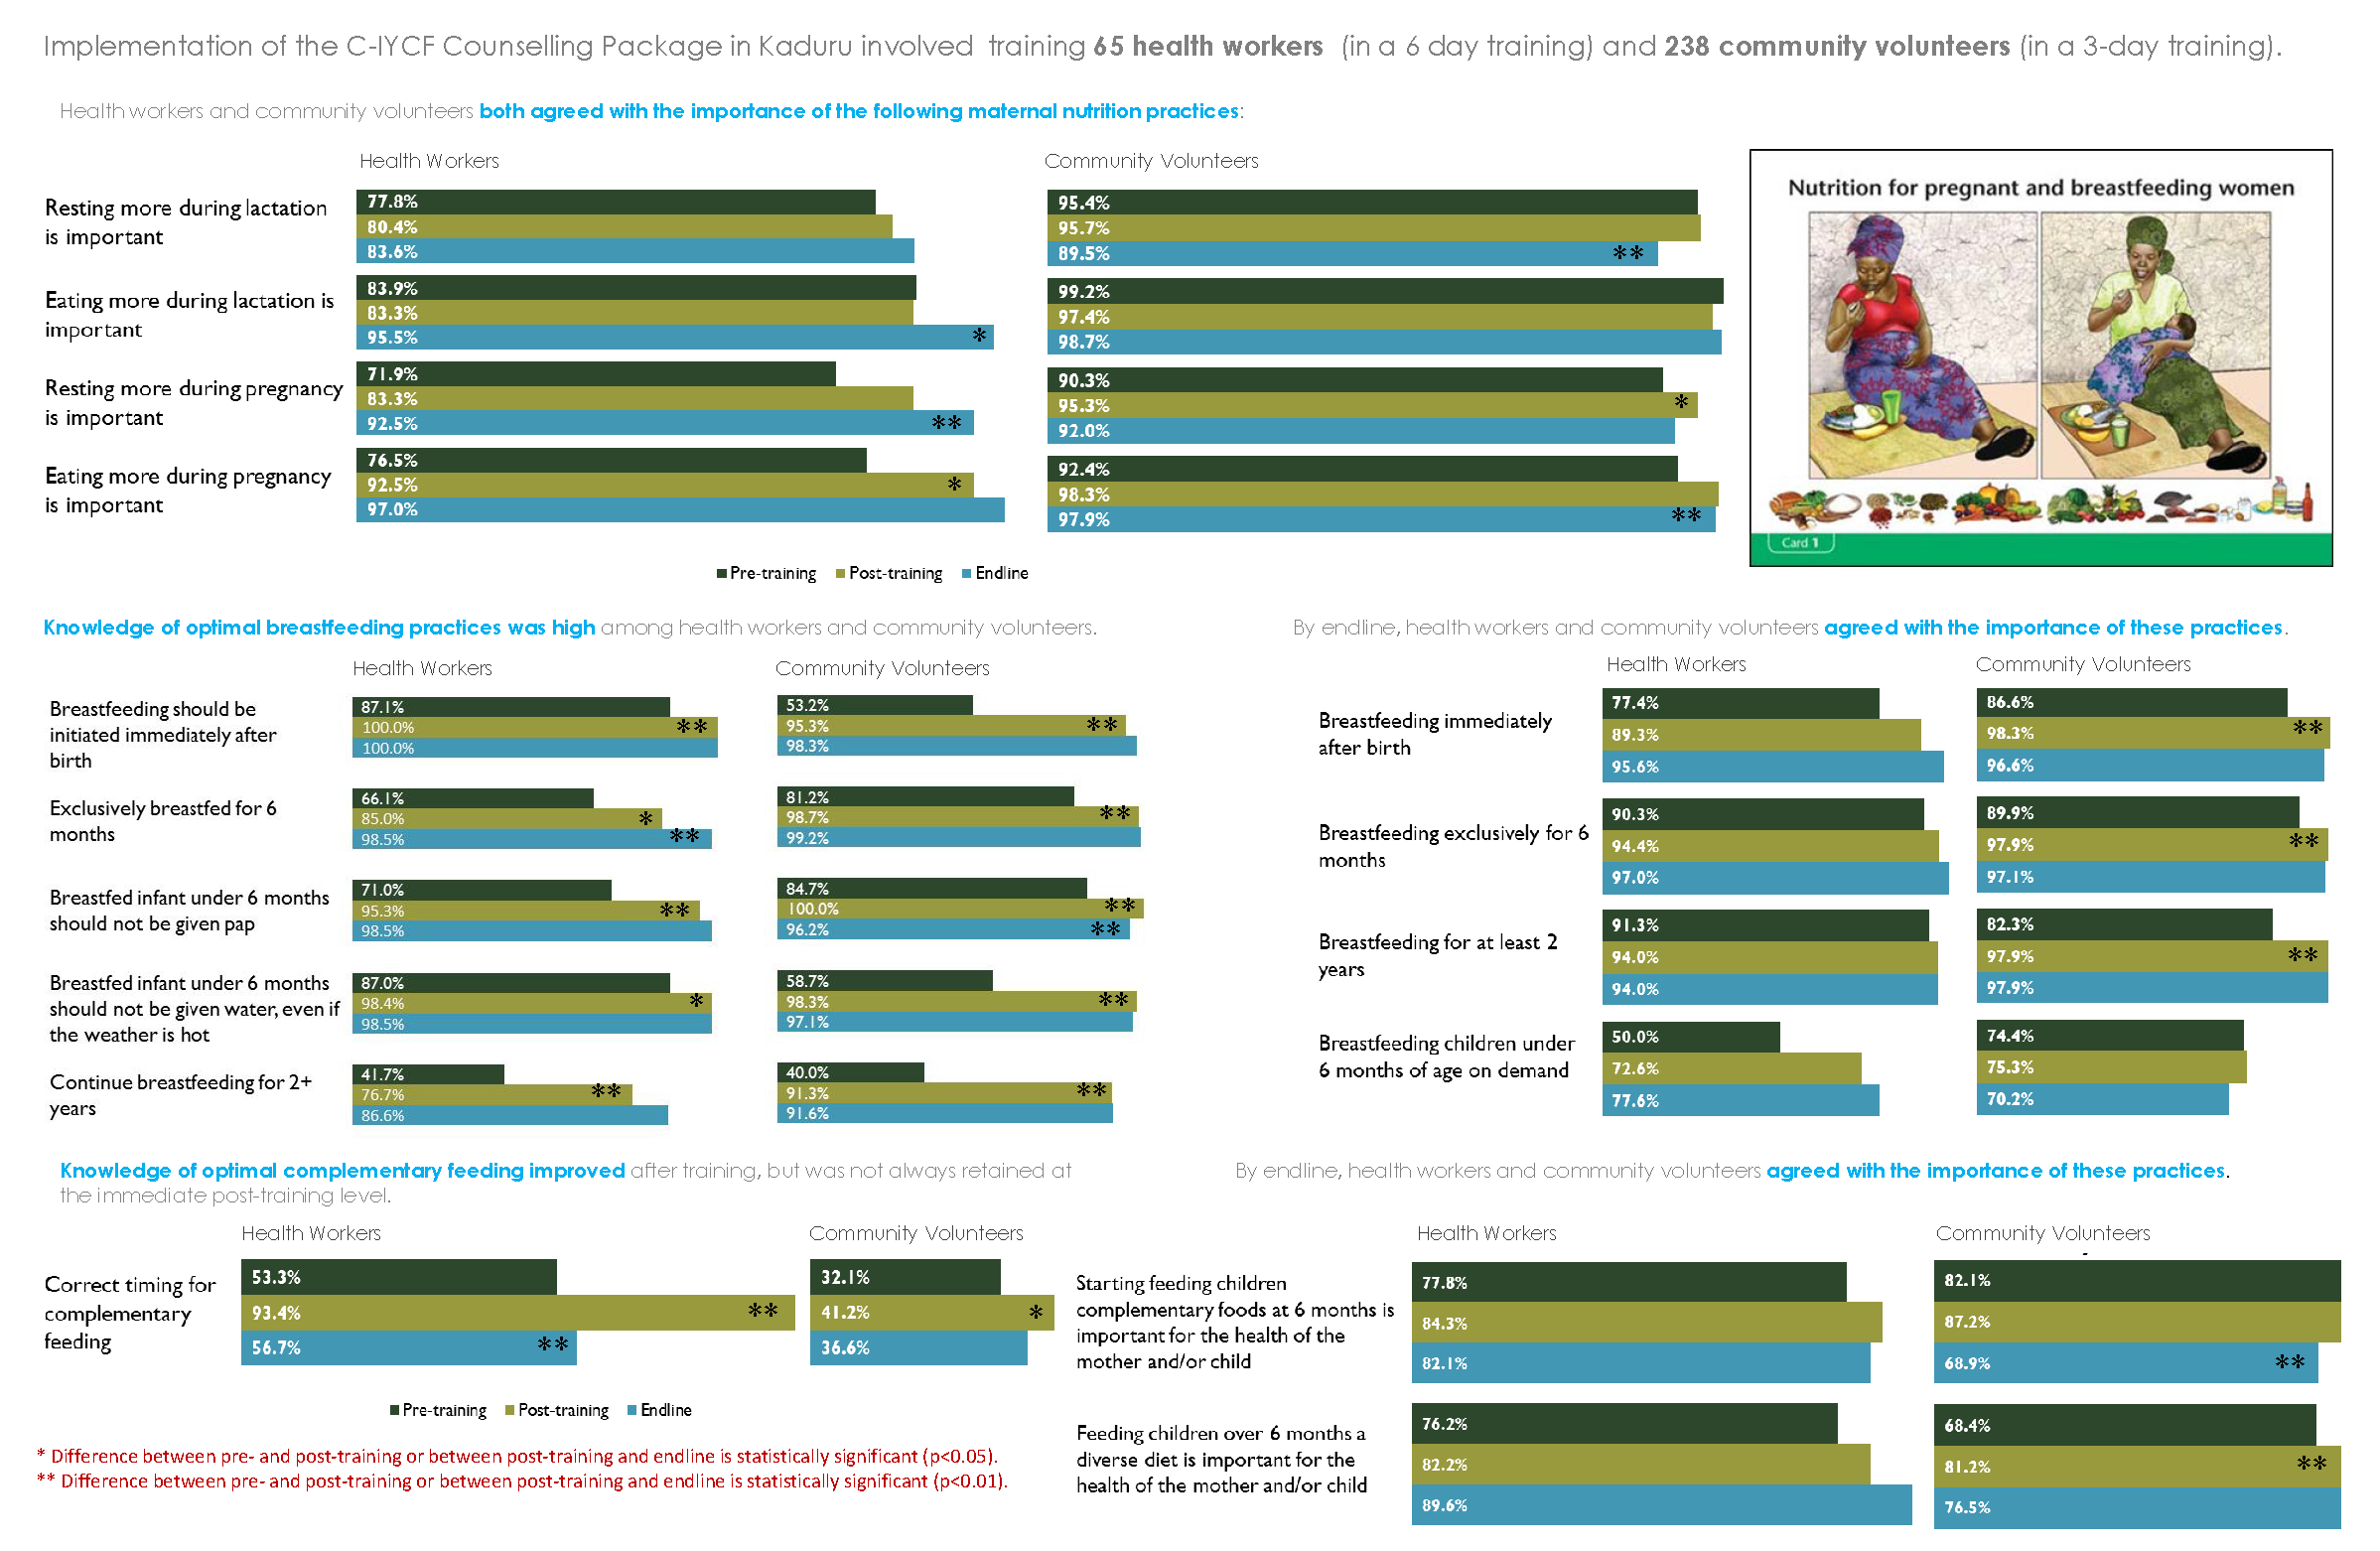 Image of the infographic showcasing survey results, see PDF for details and full alternate text